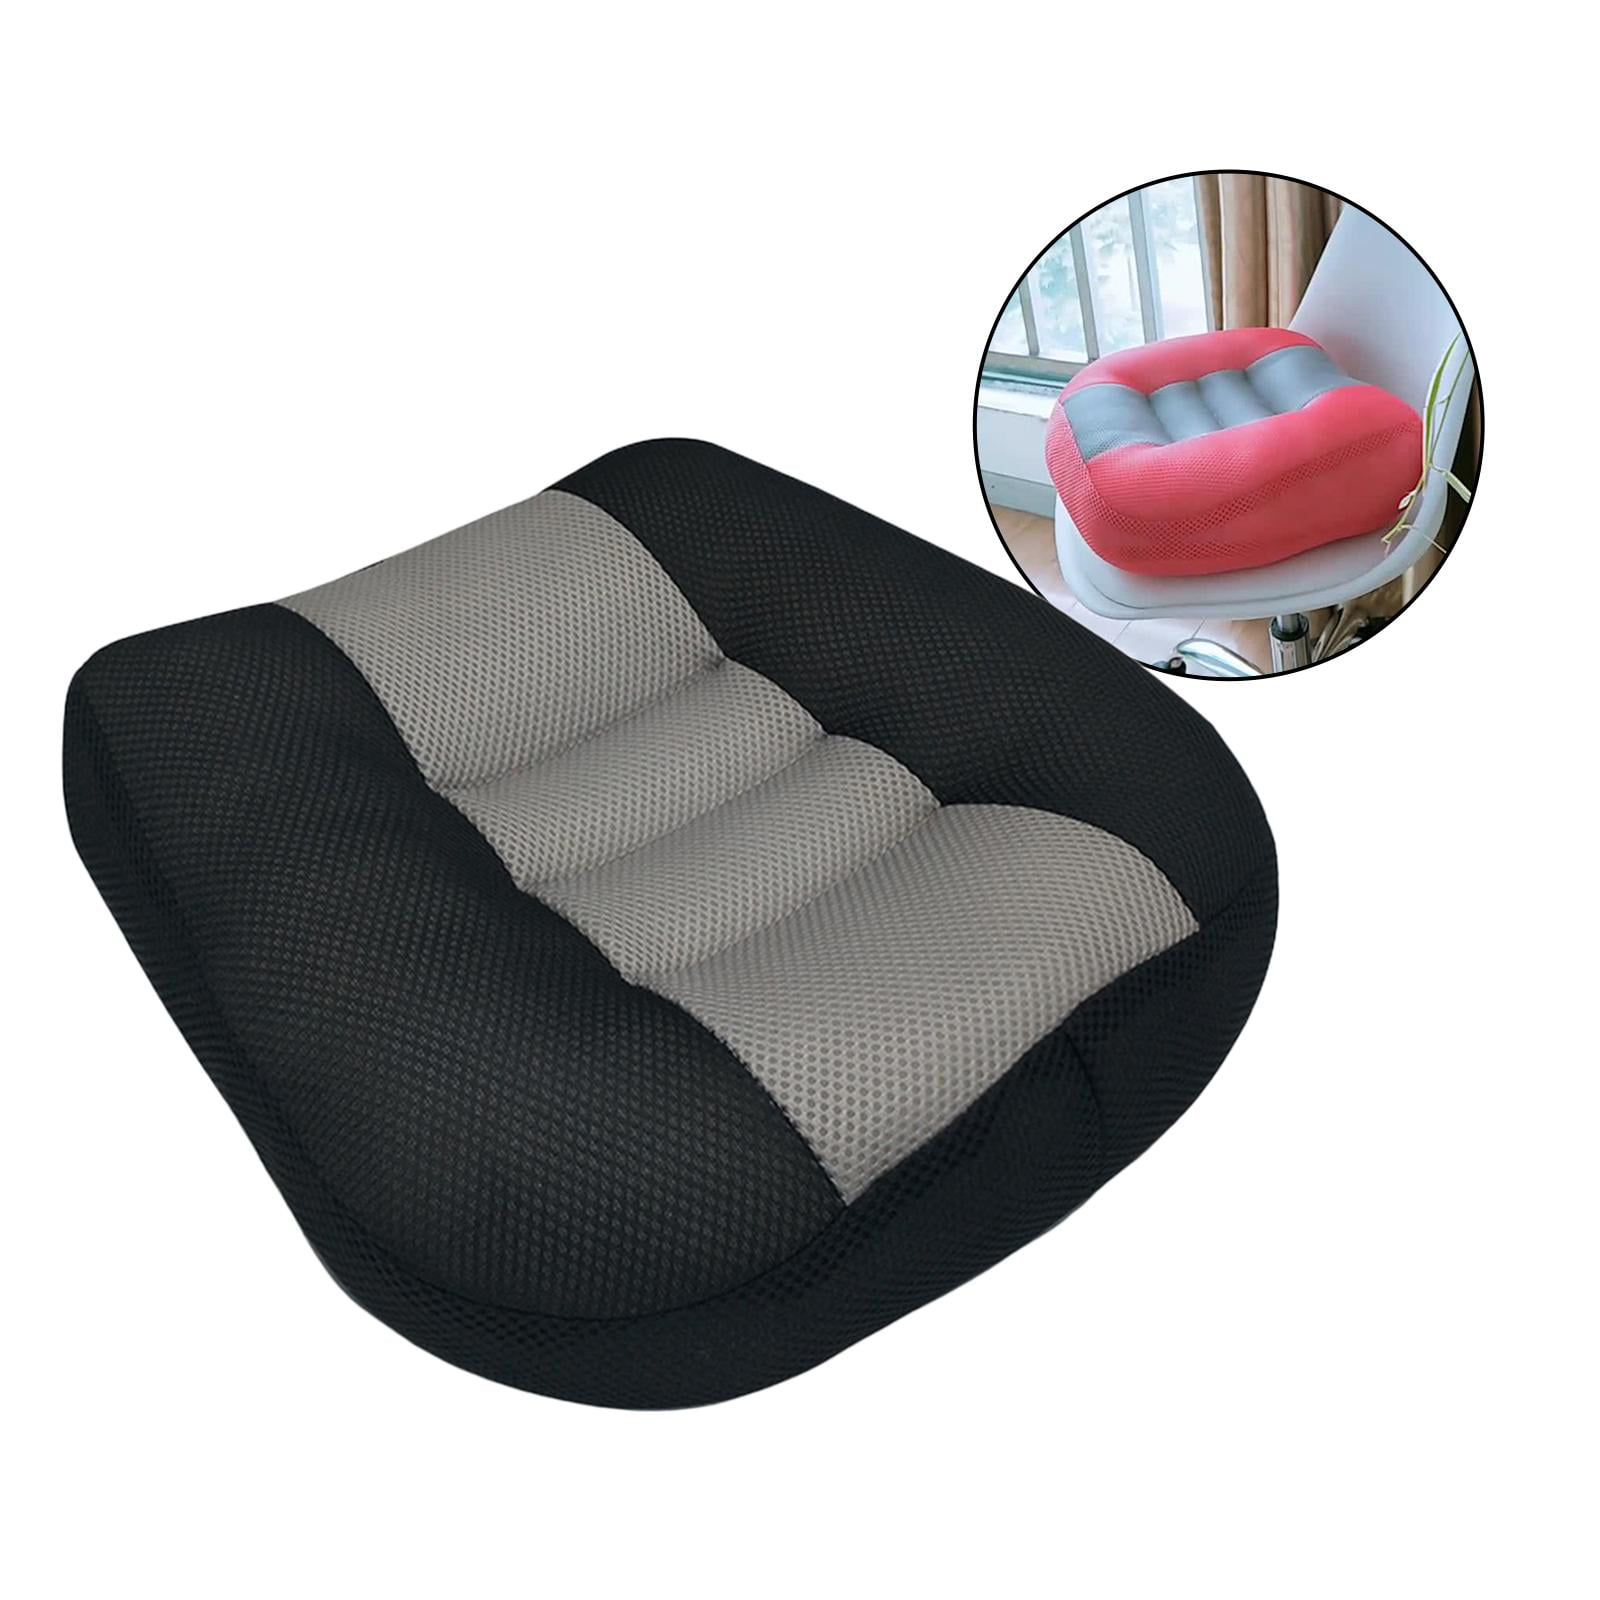 SEAHOME Car Booster Seat Cushion Heightening Height Boost Mat,Breathable Mesh Portable Car Seat Pad Fatigue Relief Suitable for Trucks,c